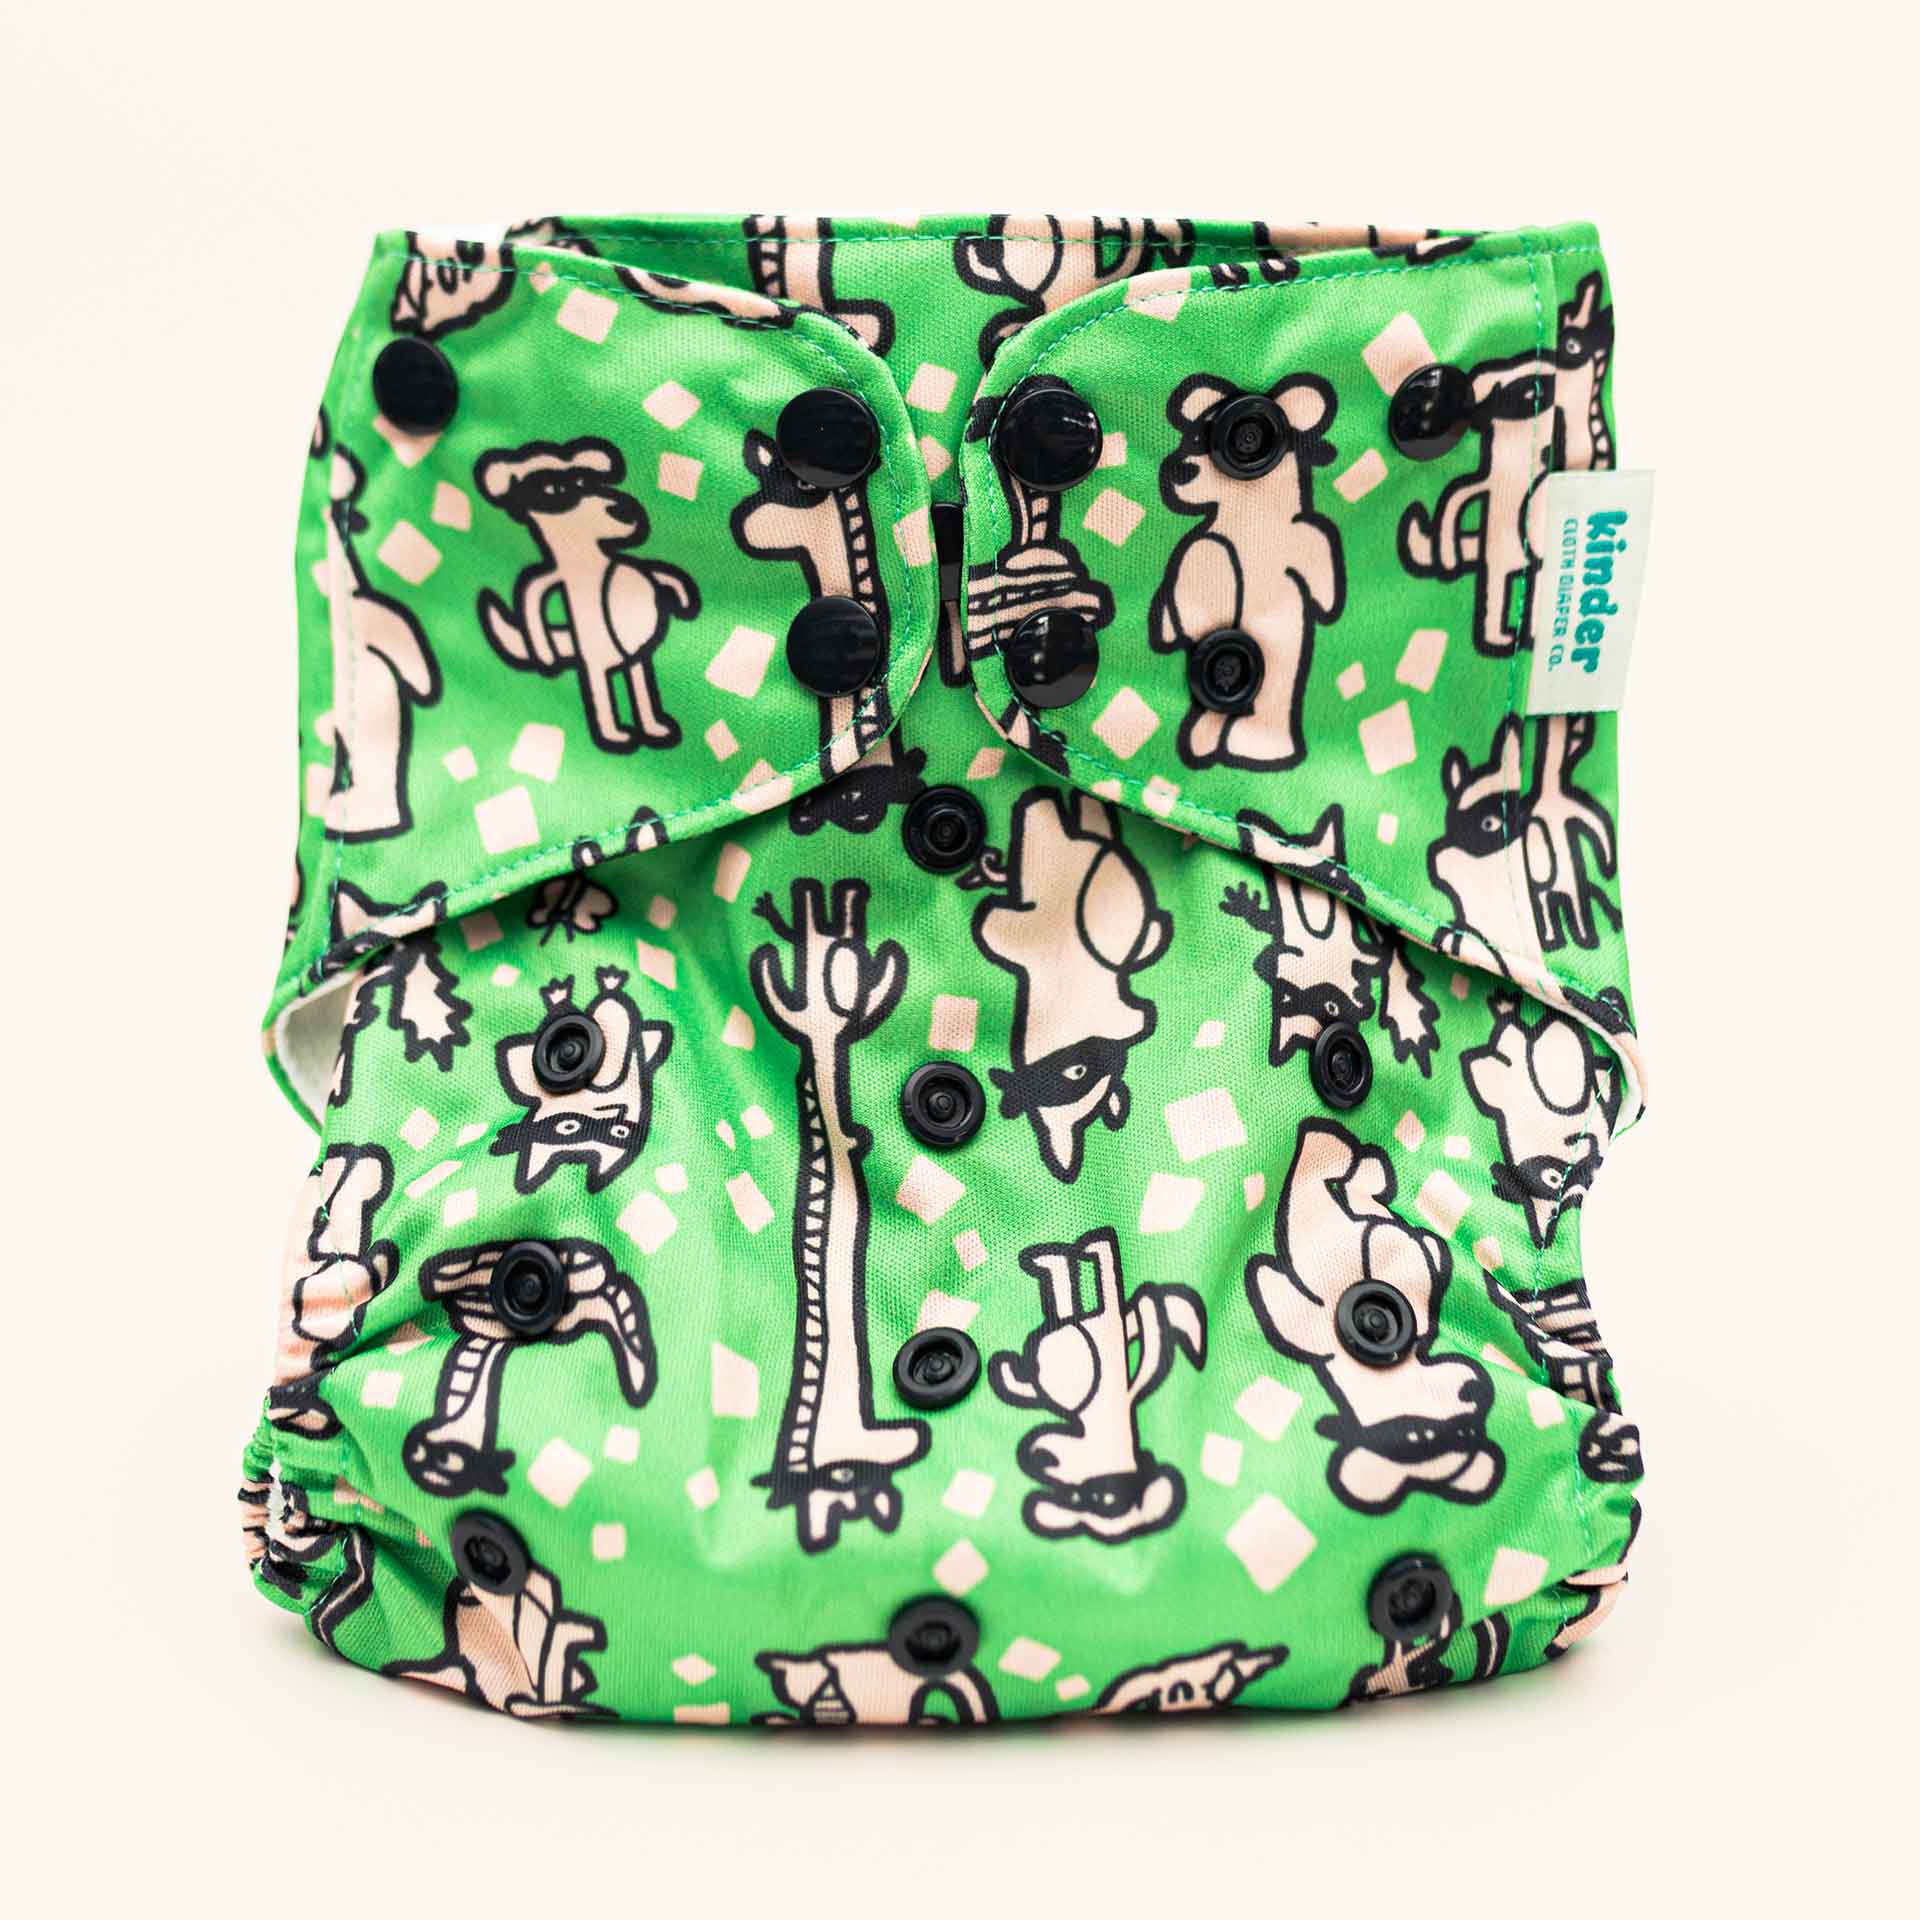 Patterned Pocket Cloth Diaper with Athletic Wicking Jersey